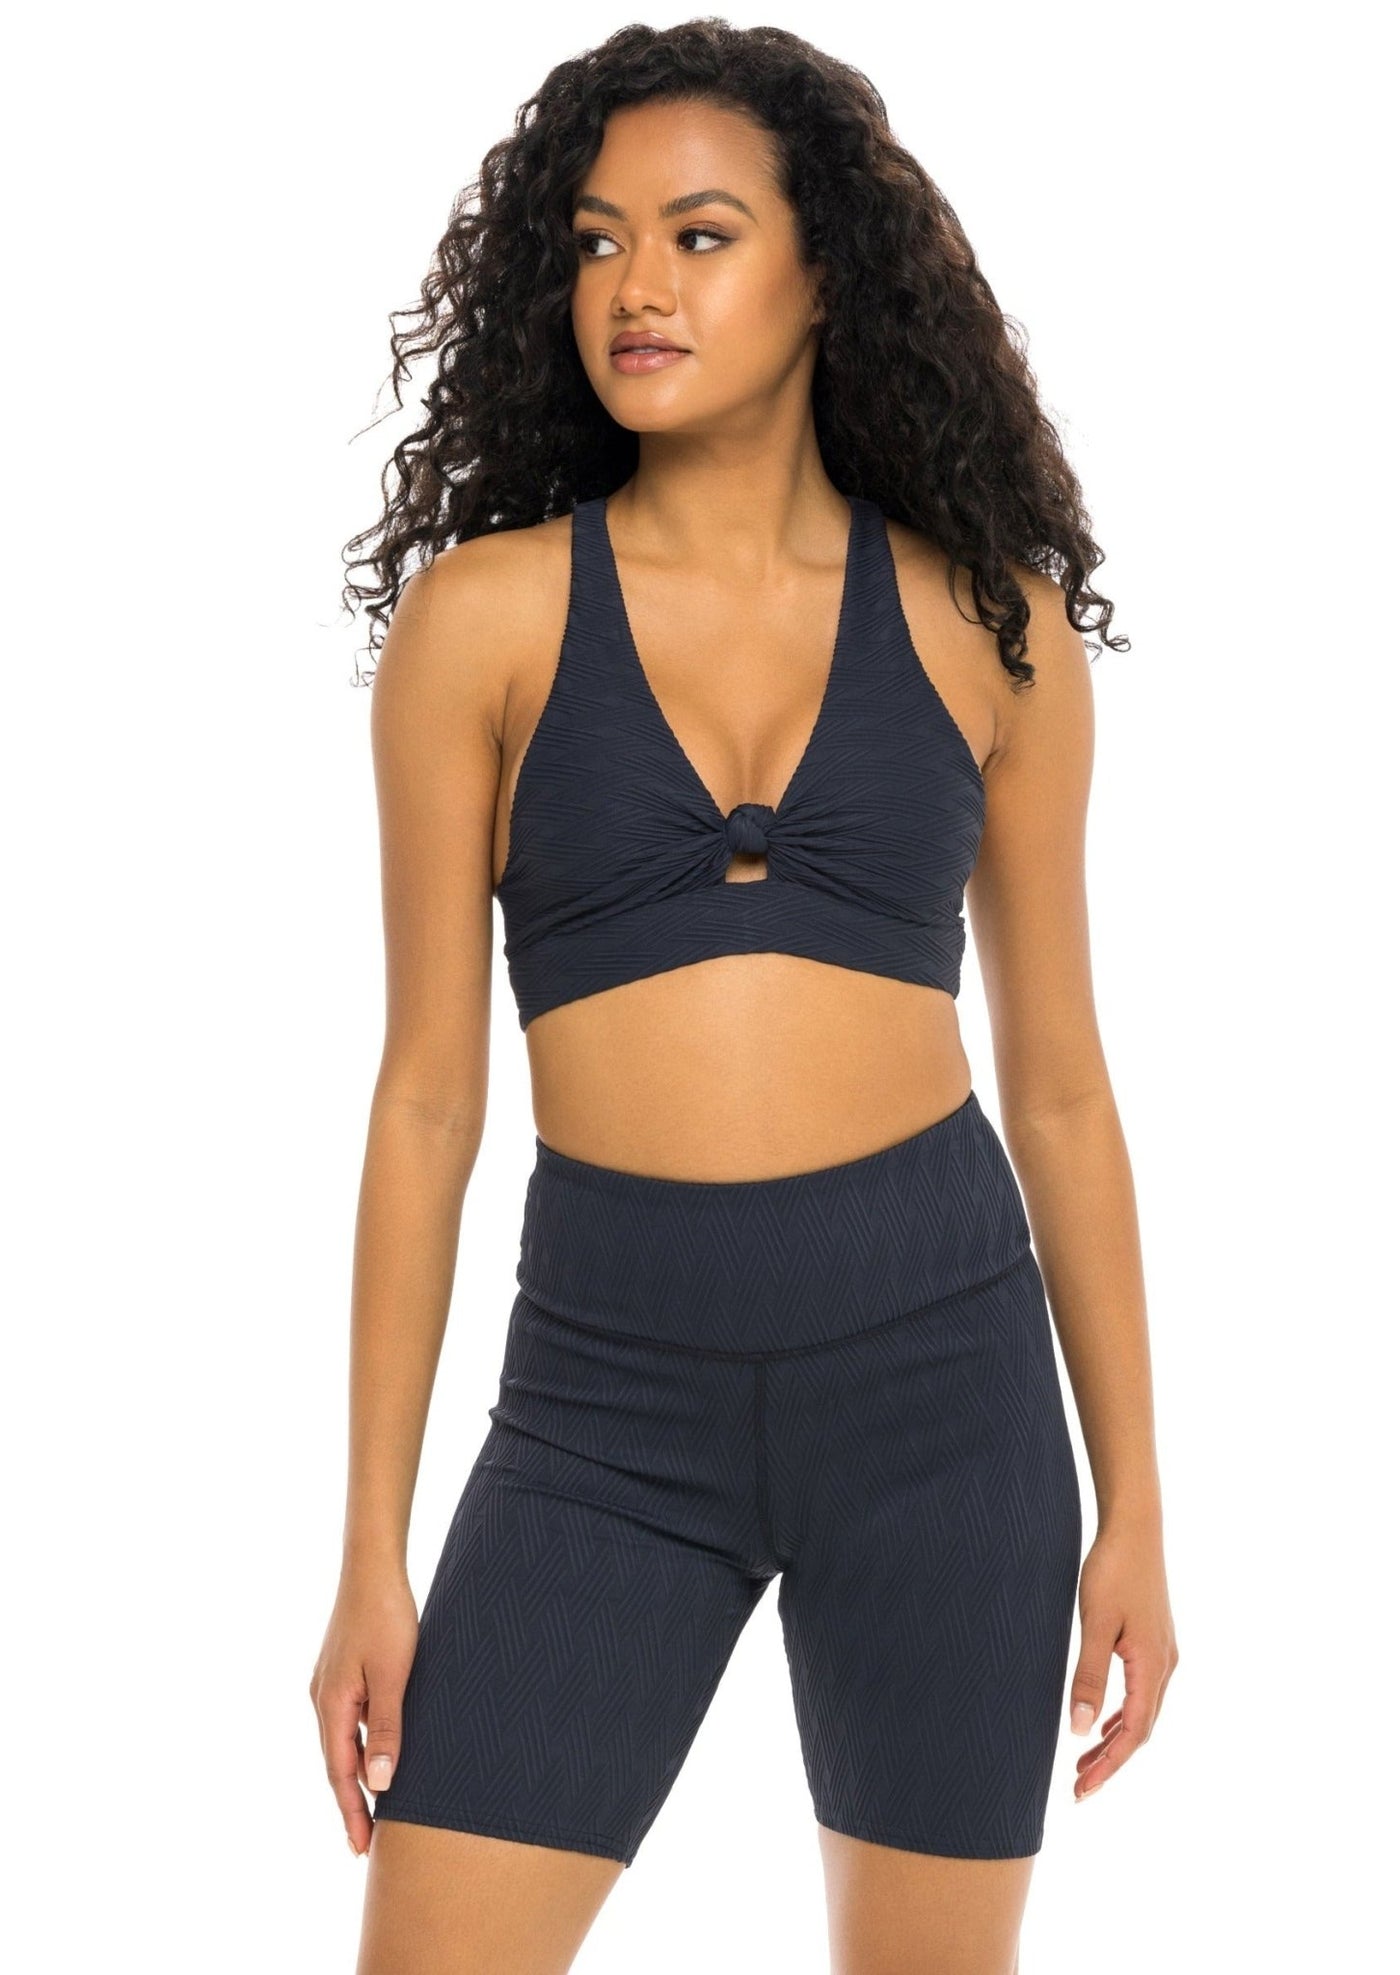 Phase Knotted Active Bra Top - Black Sands - Active Top - JMP The Label